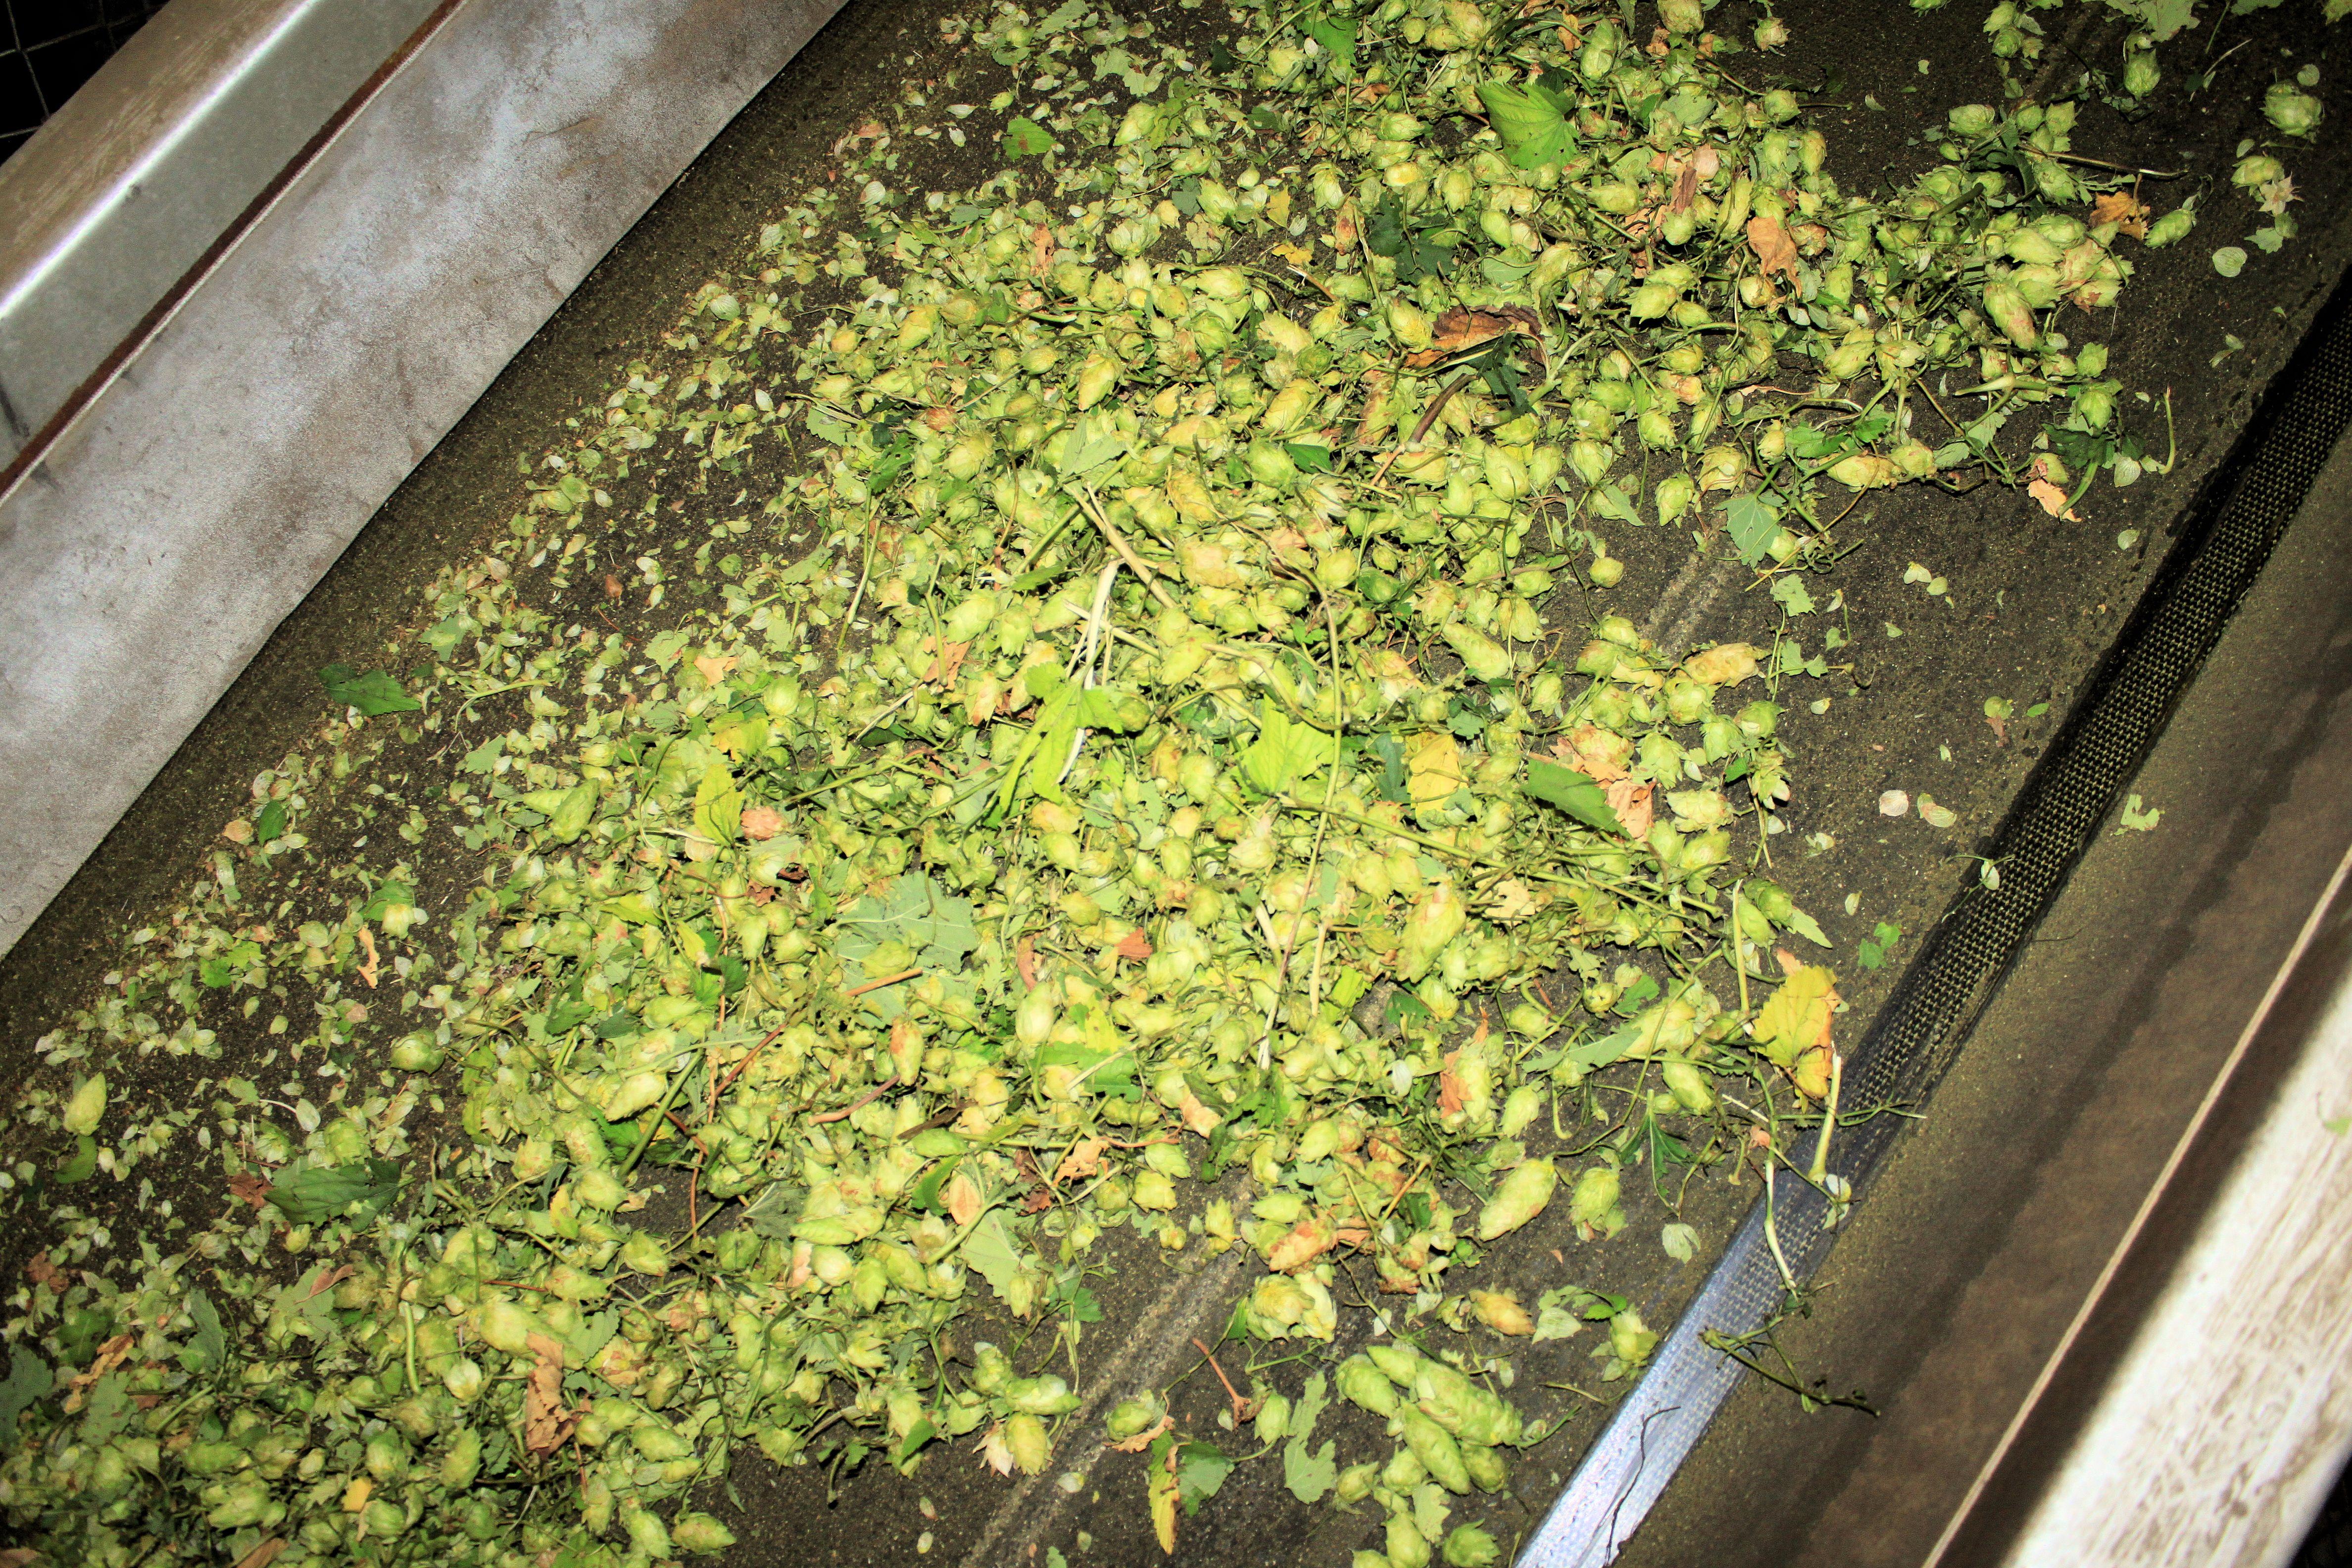 09 Hop cones and leaves removed from the vines